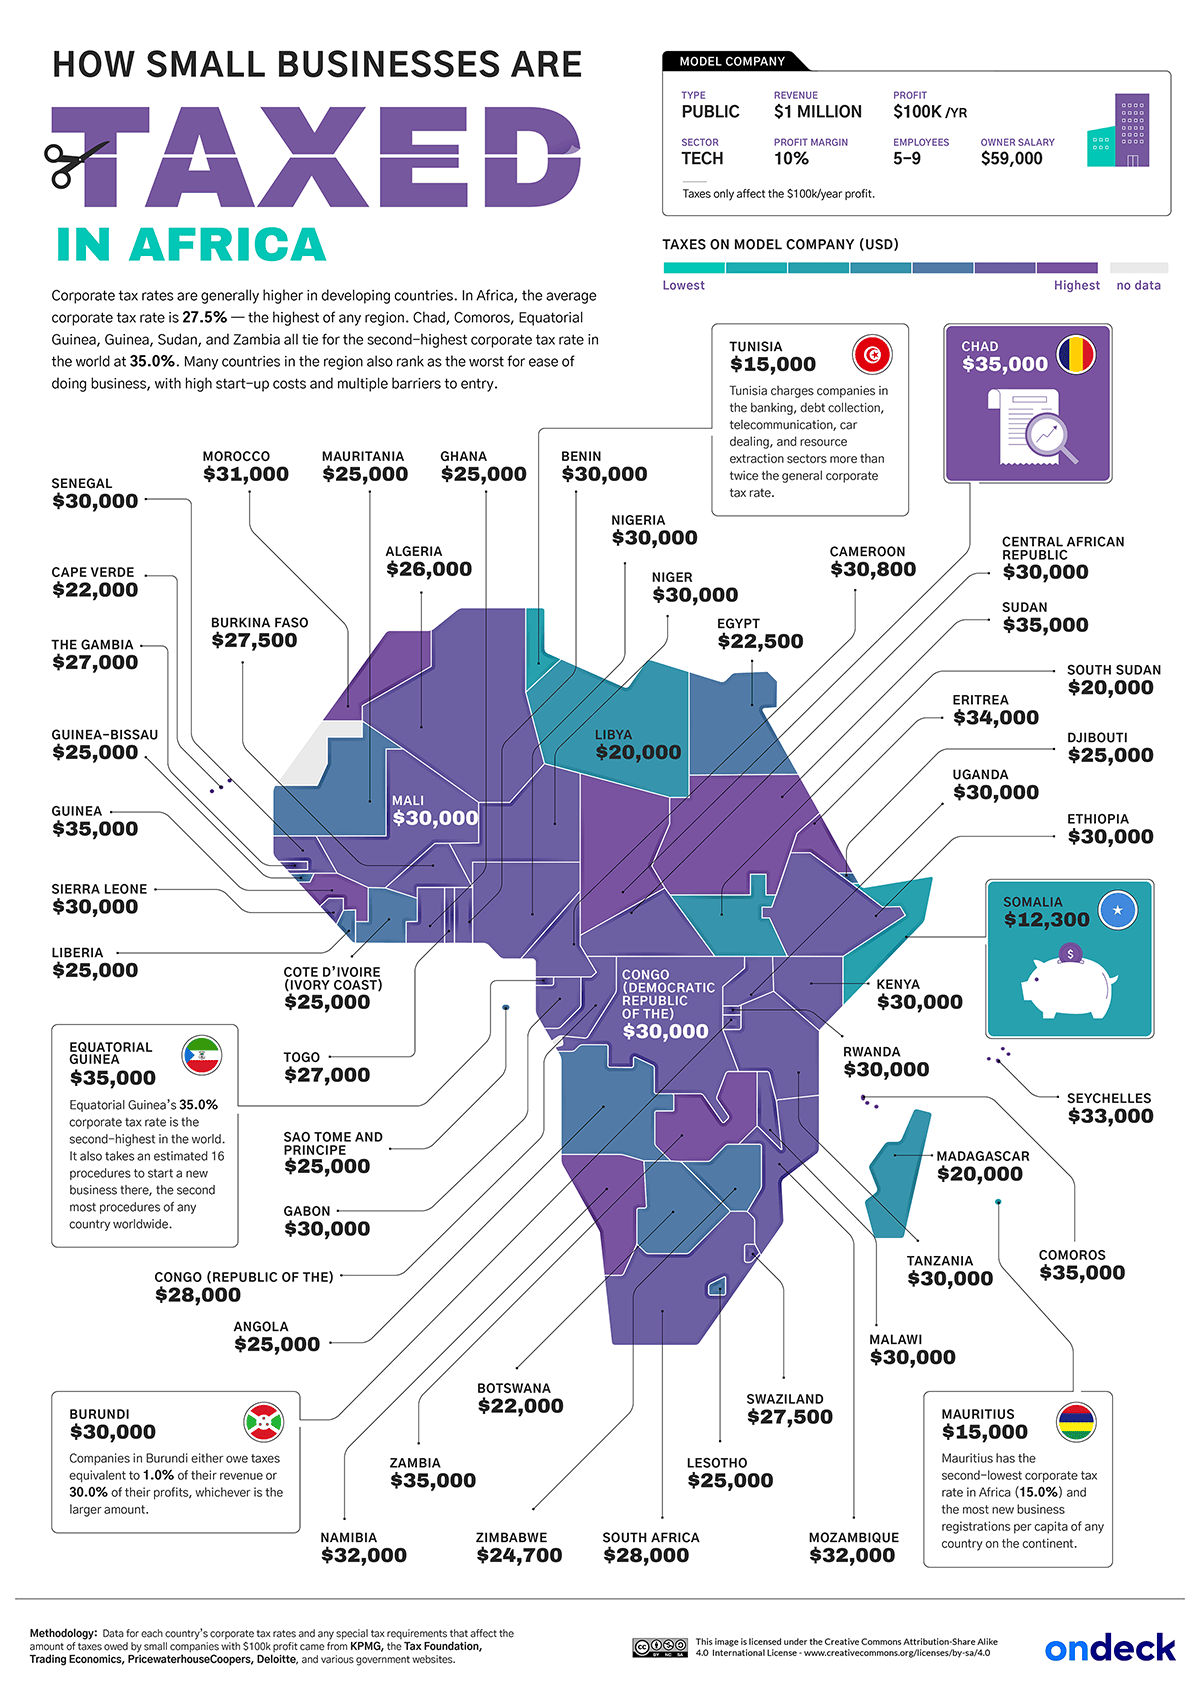 How Small Businesses are Taxed in Africa